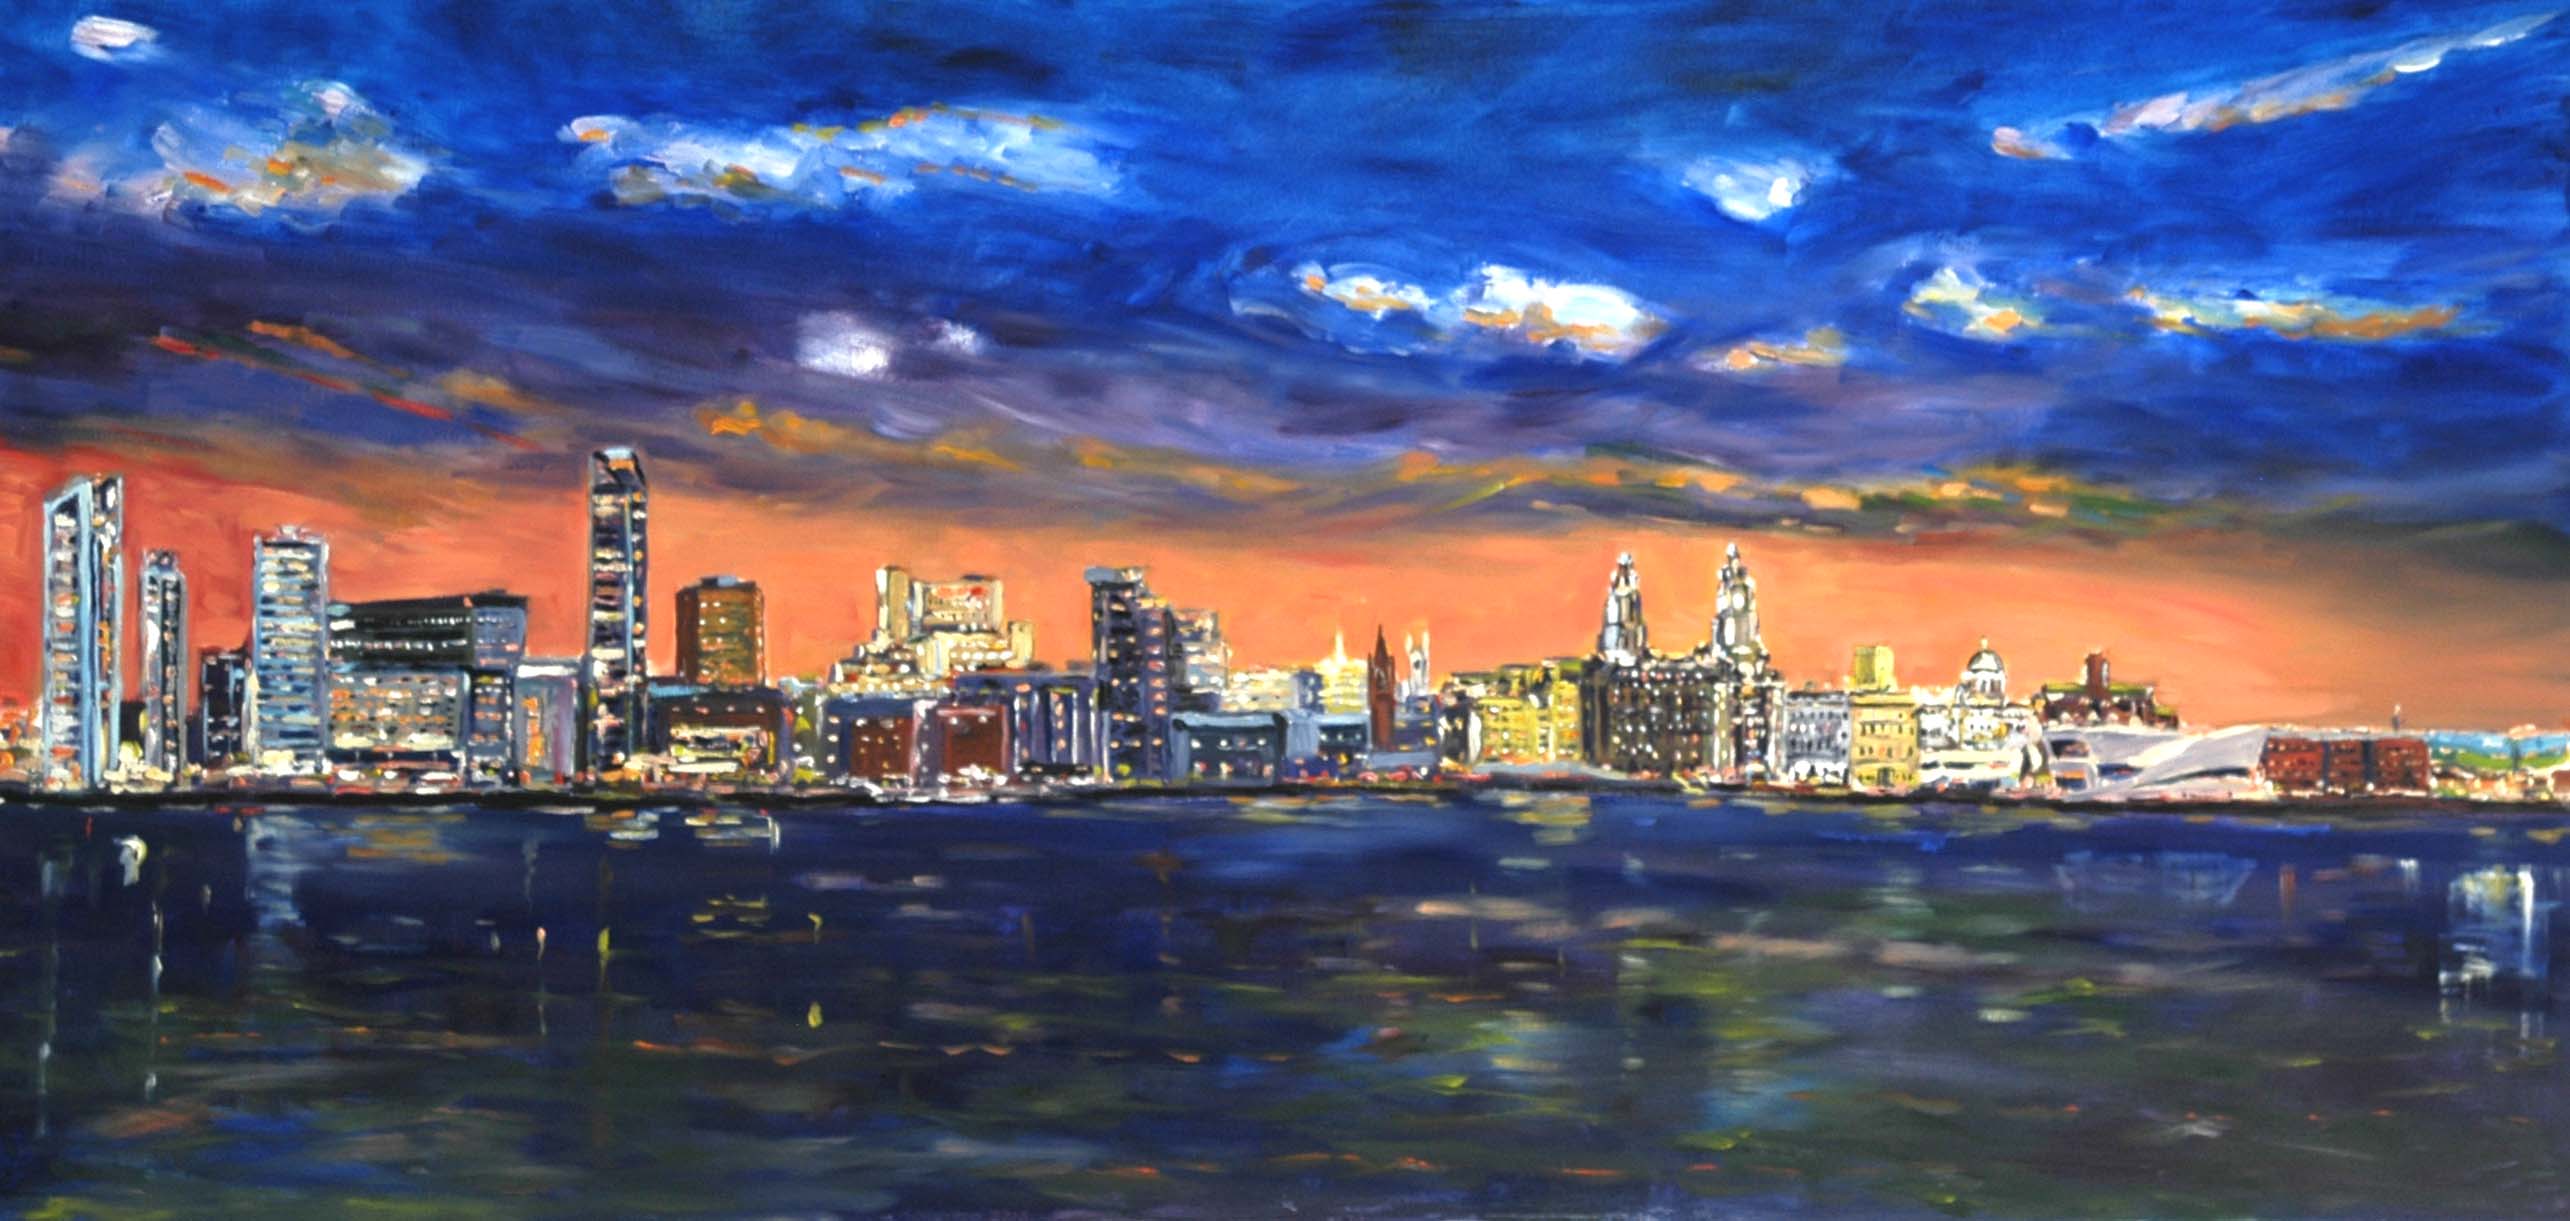 commission a painting, commission an artist, buy paintings, original art, Liverpool, paintings of Liverpool, art classes, near me,